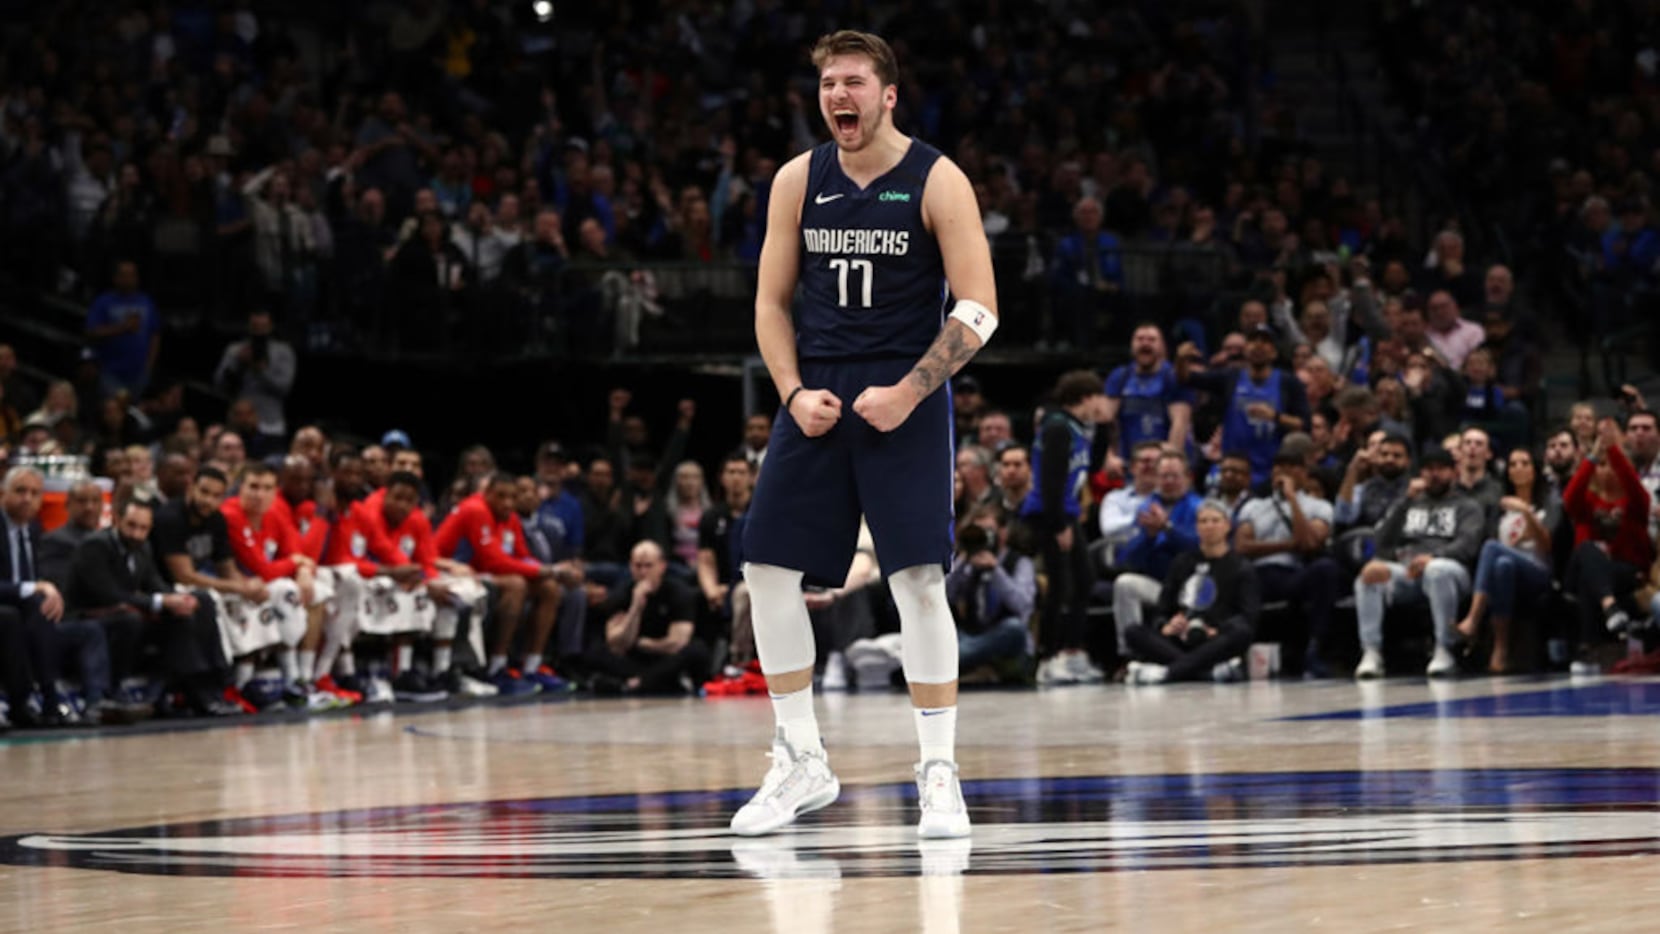 Nike's newest shoe collection includes Luka Doncic-inspired his Jordan debut